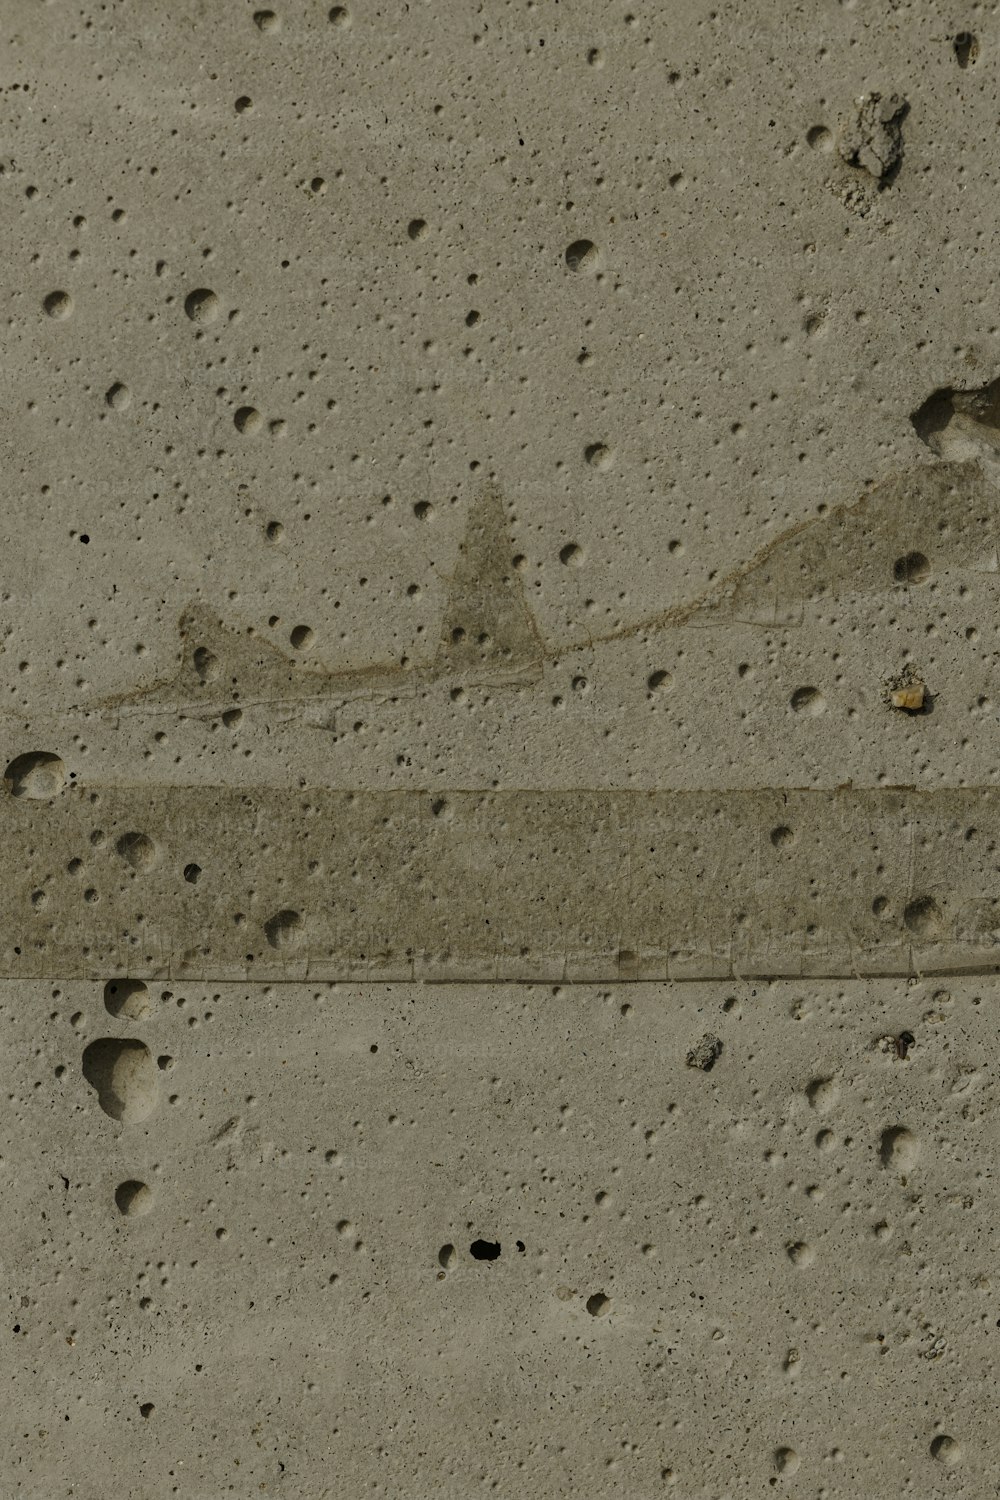 a close up of a street sign on a cement surface